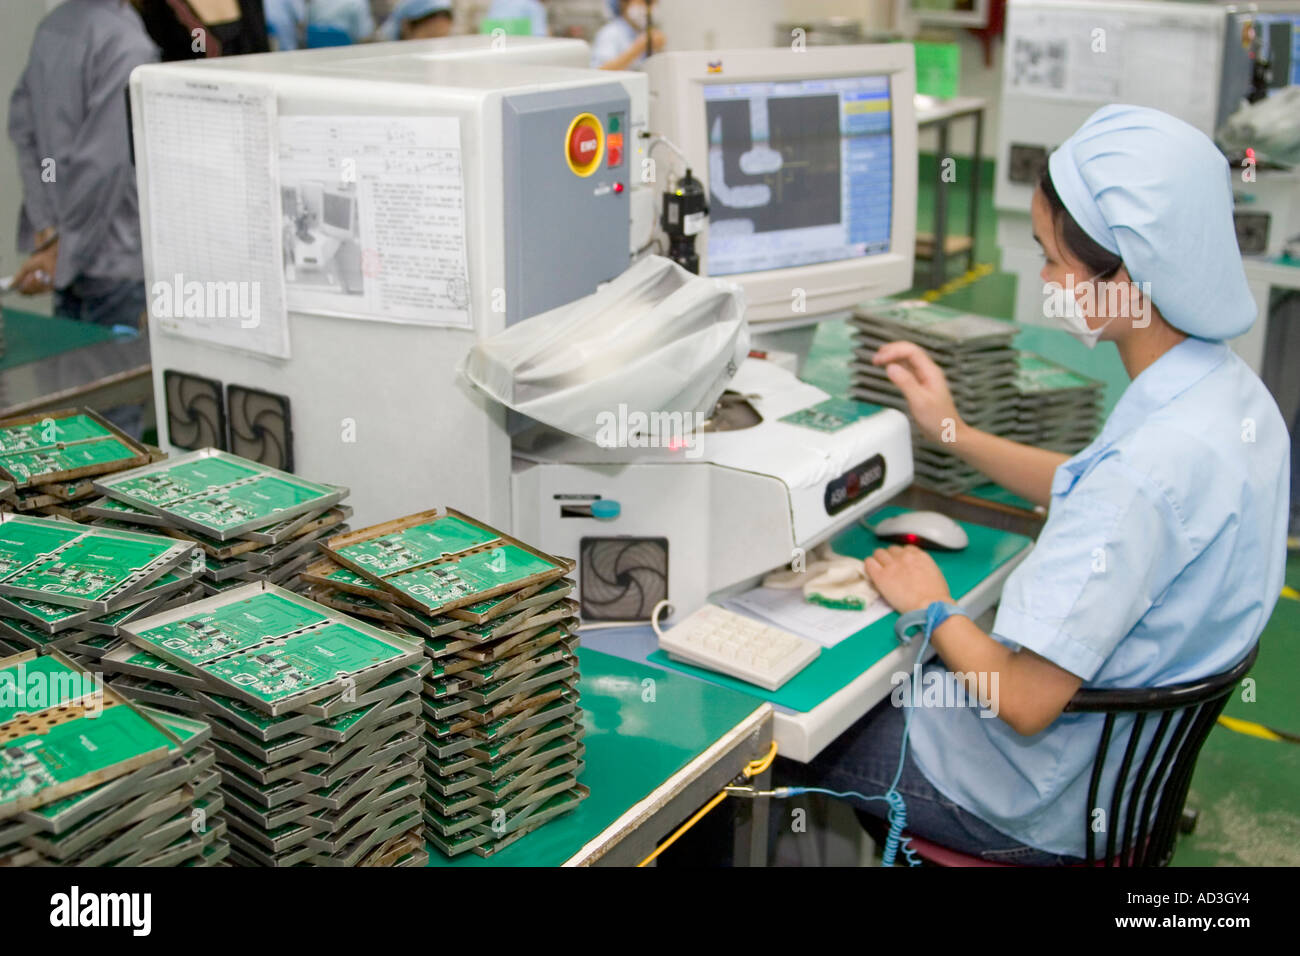 Chinese High Tech Factory workers working by hand with LCD display boards assembling components Stock Photo